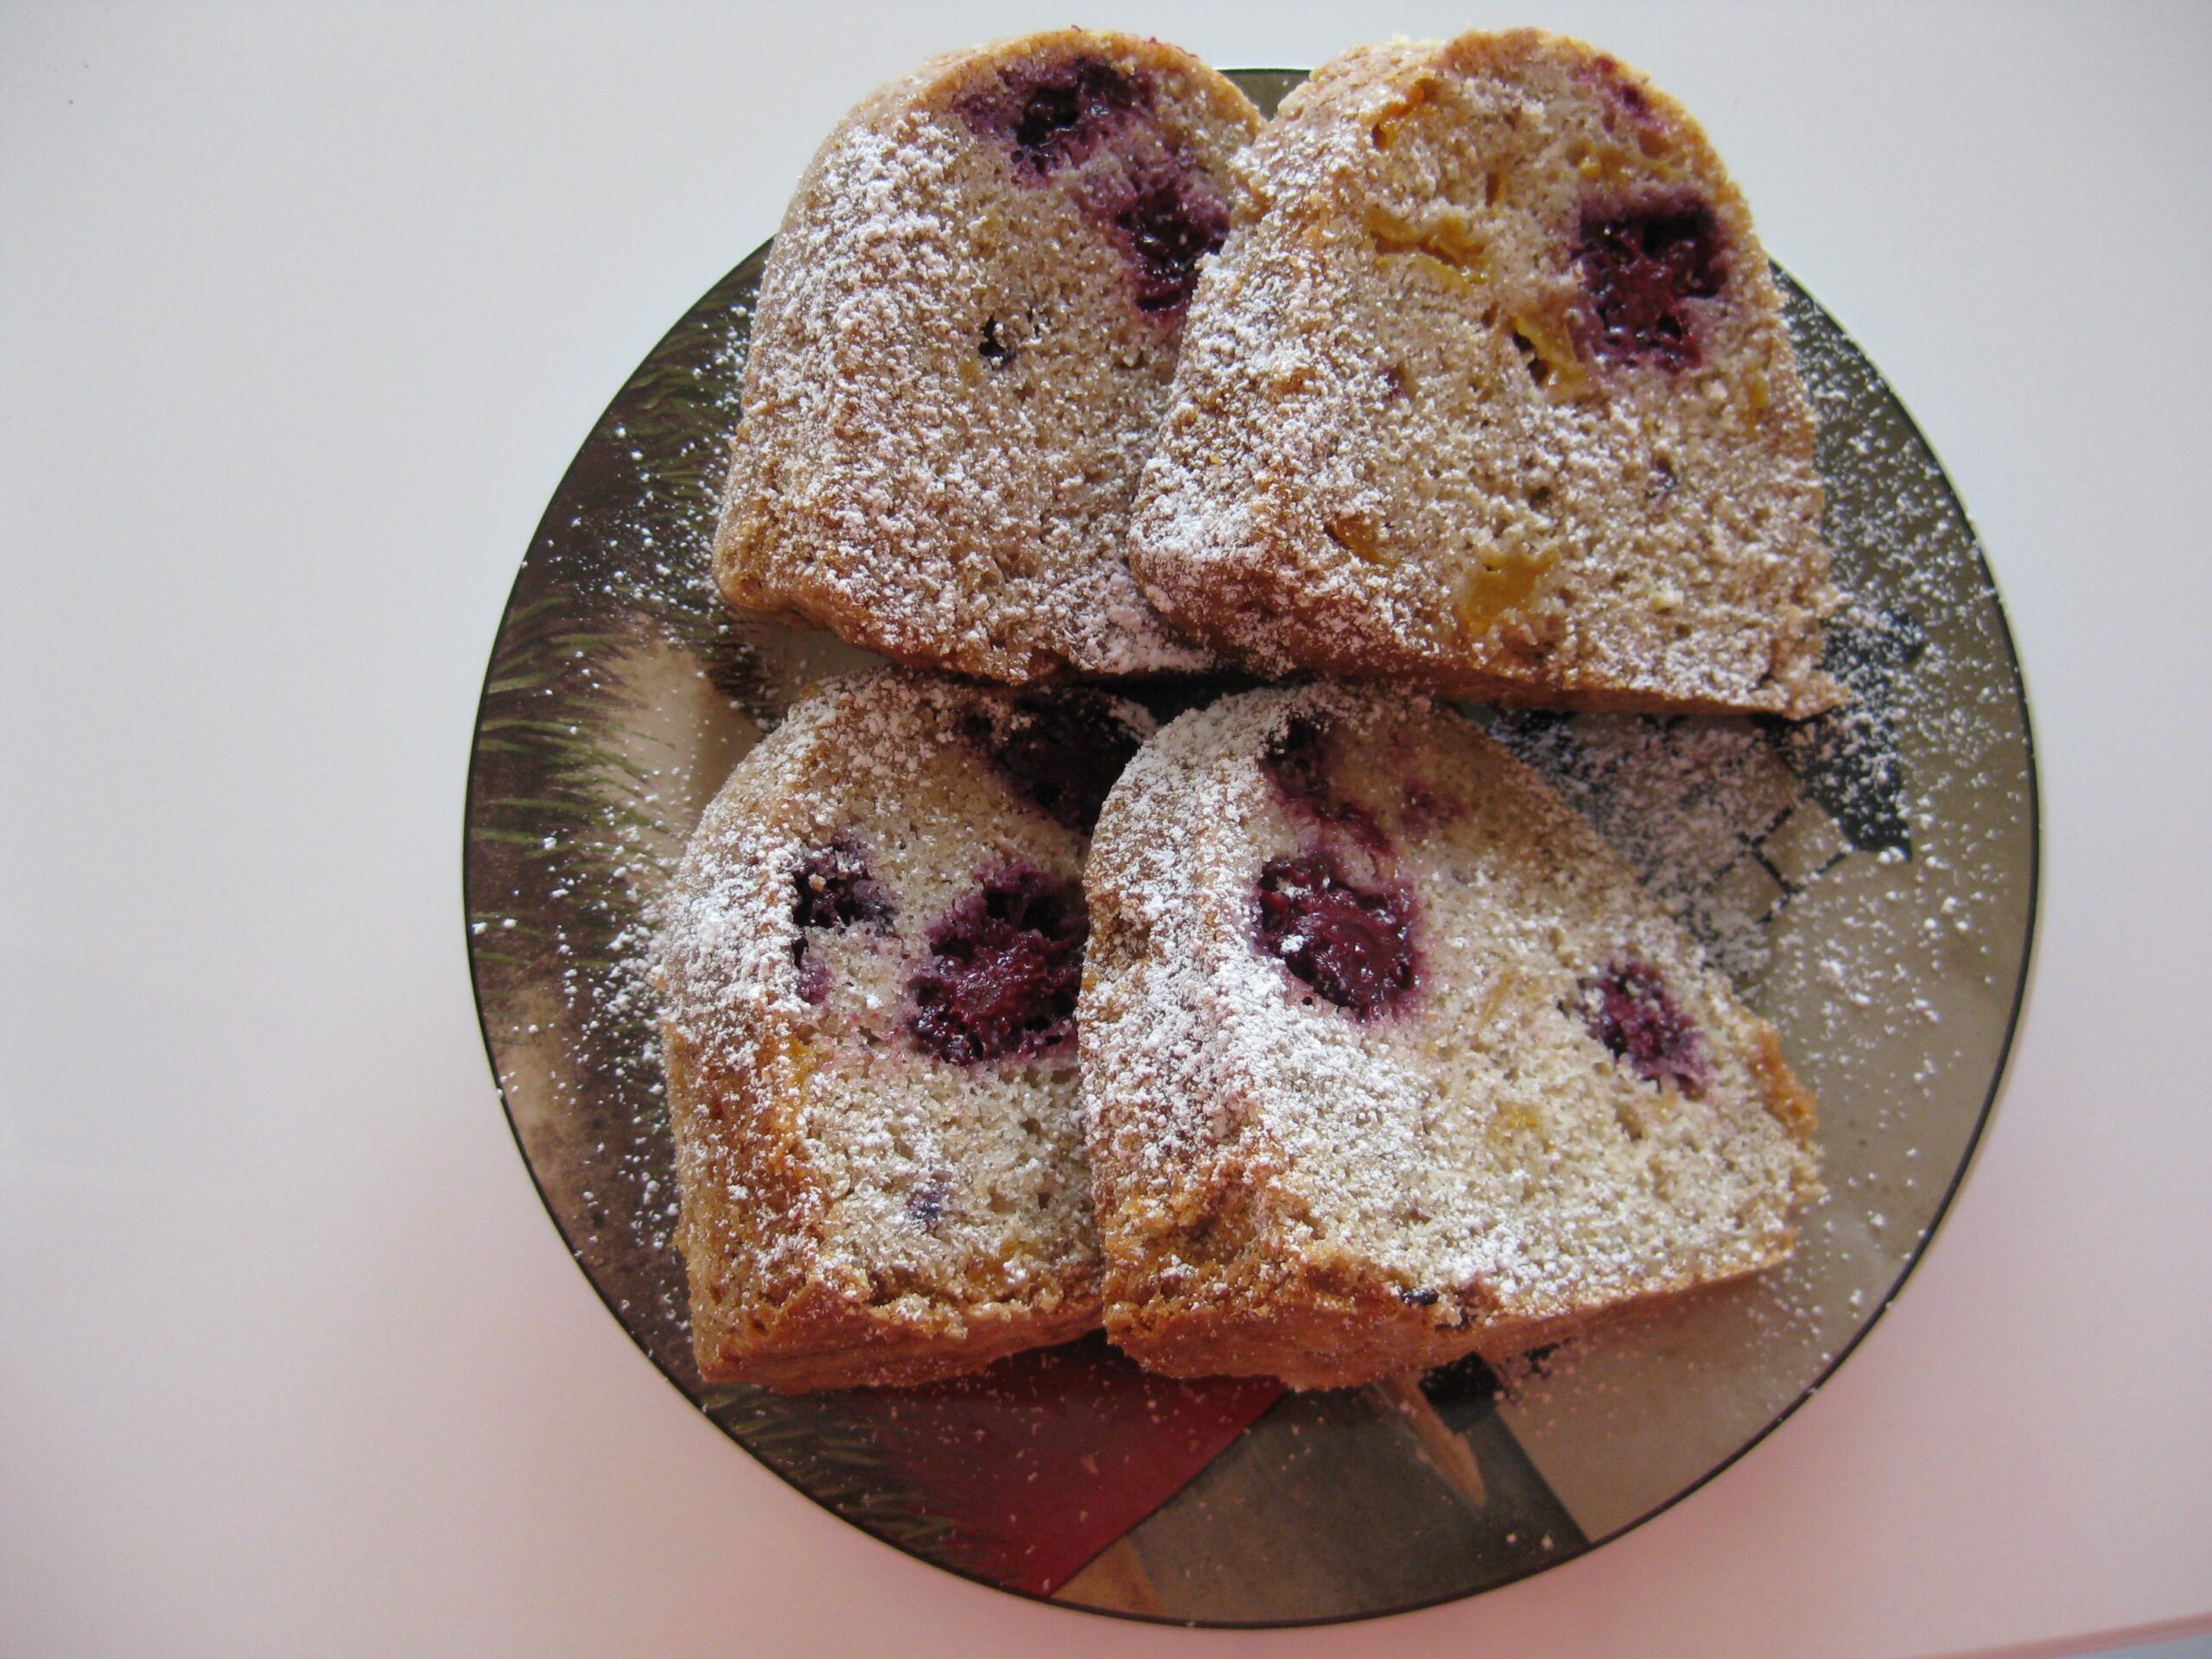 Indulge in Blissful Delight with Blueberry Peach Pound Cake